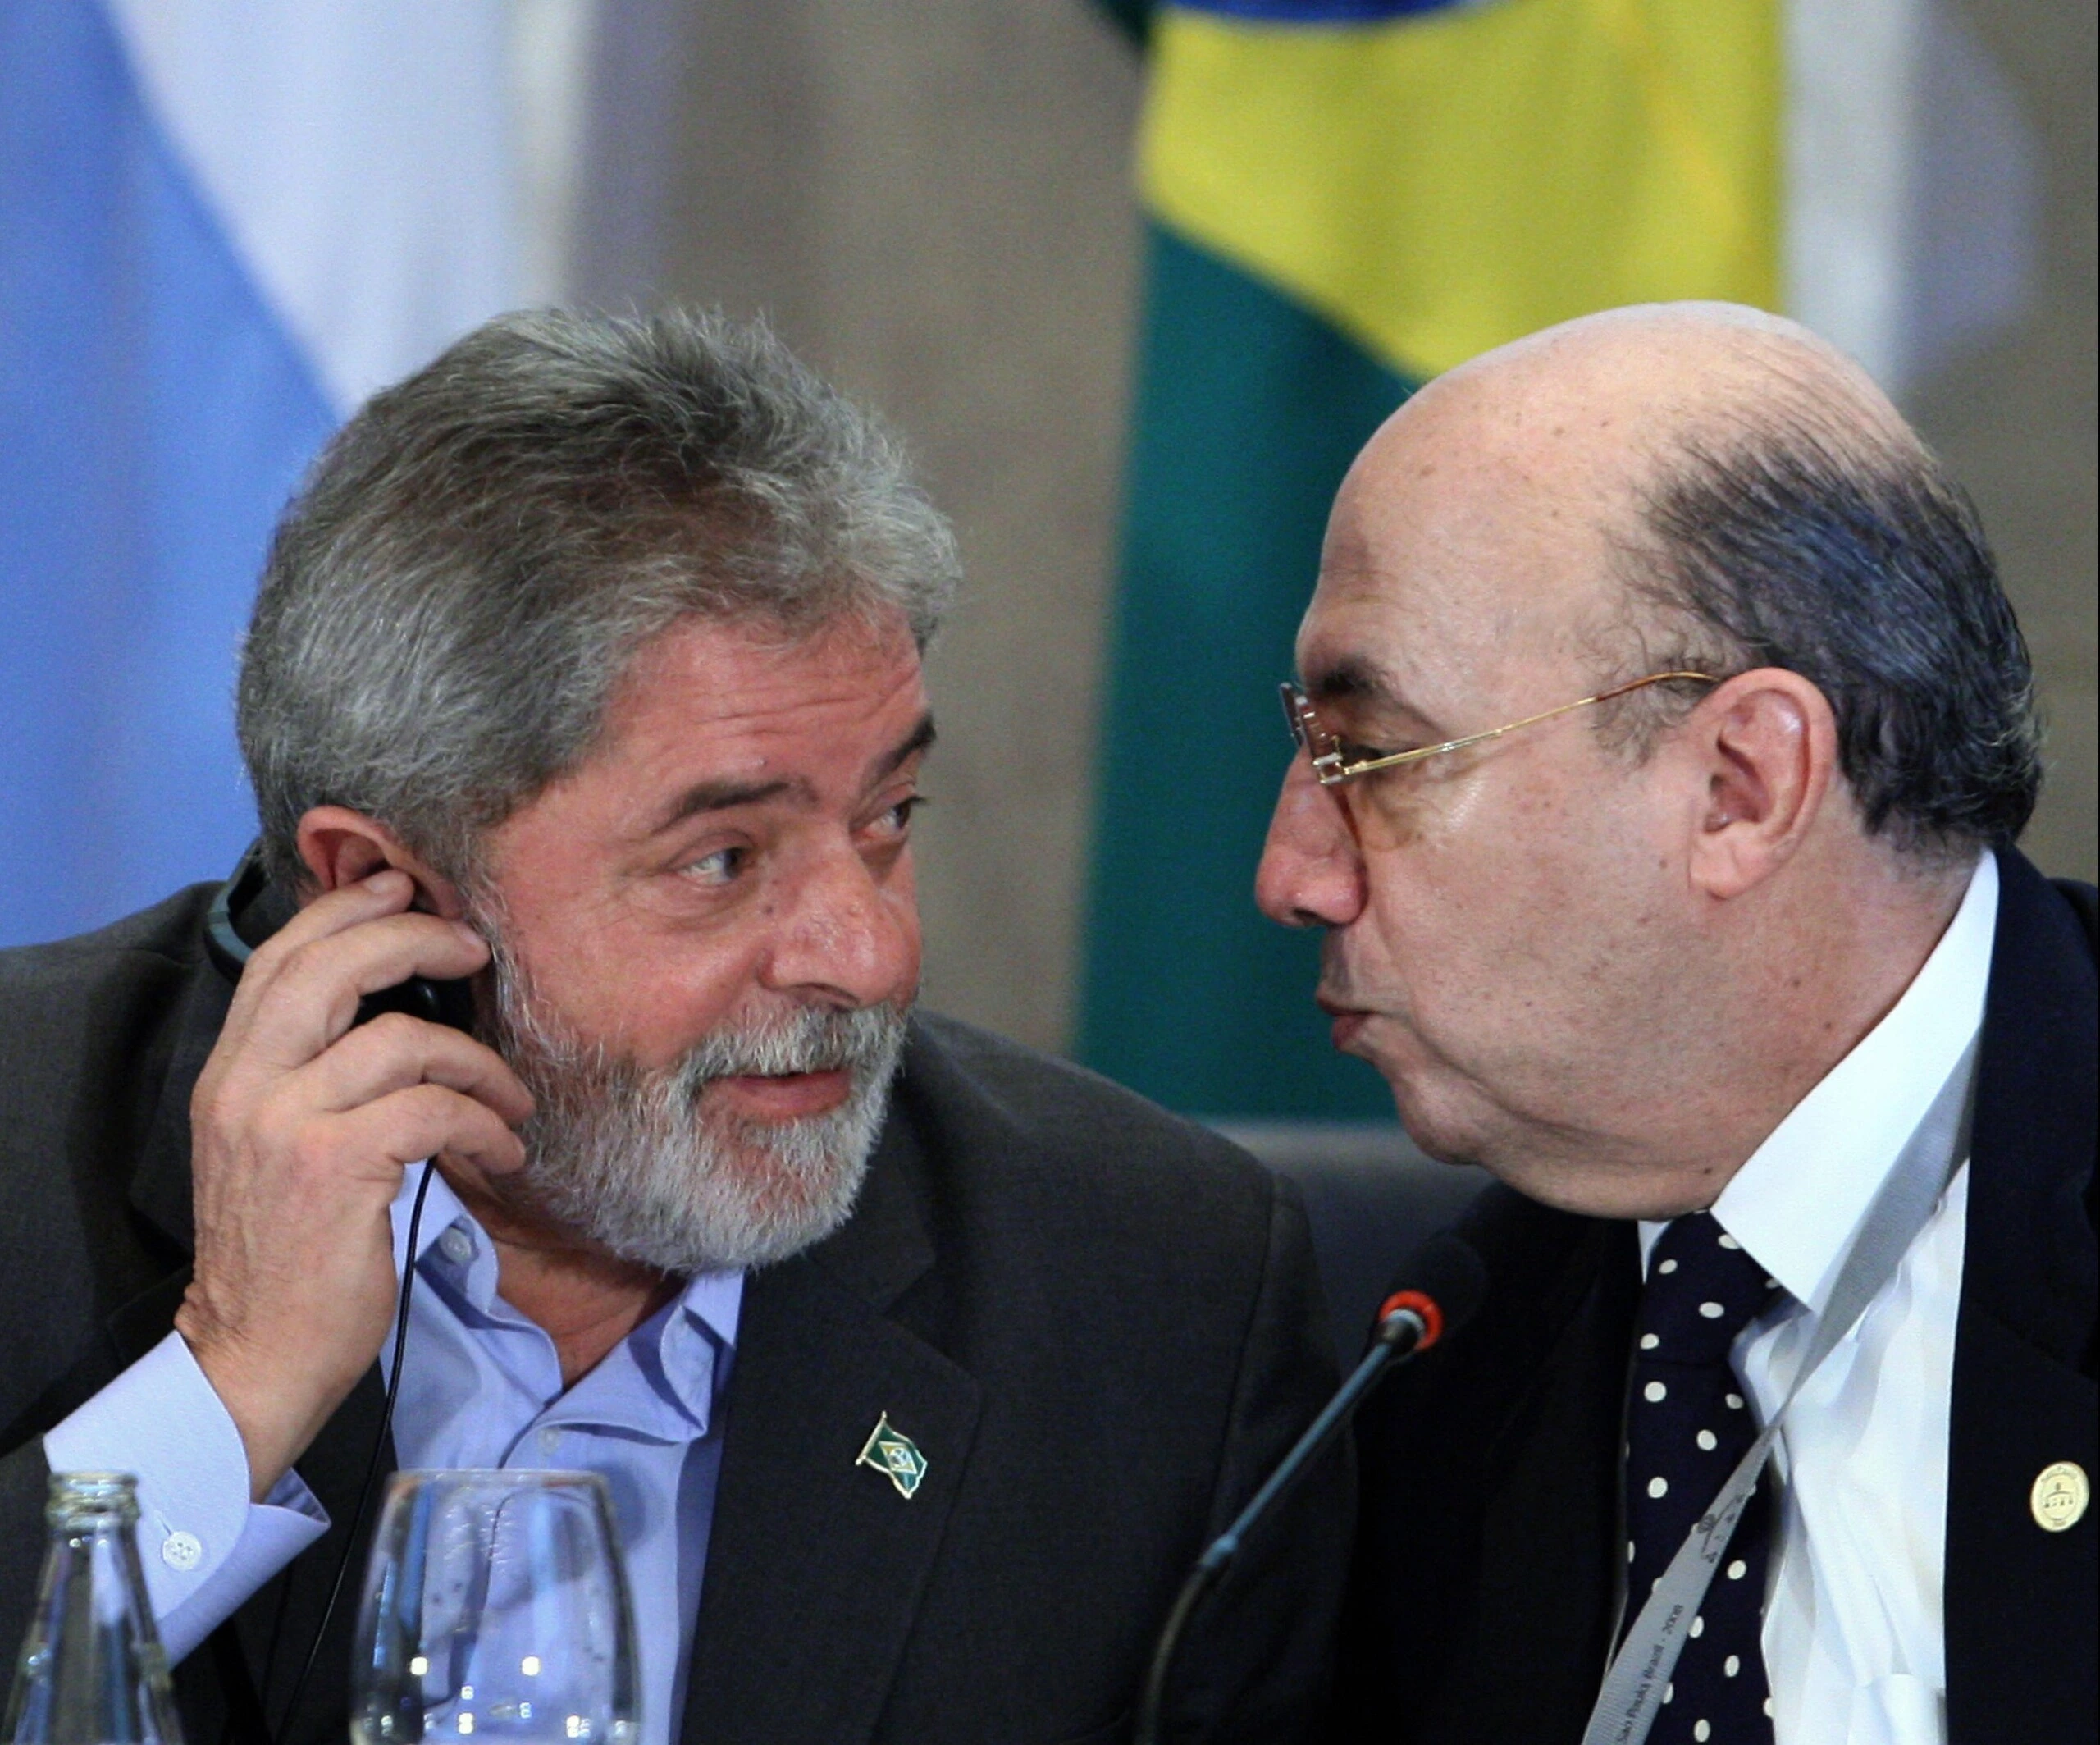 Brazil's President Luiz Inacio Lula da Silva (L) chats with Central Bank president Henrique Meirelles, during the opening of the G20 Ministers and Central Bank Governors' Meeting, in Sao Paulo, Brazil, on November 8, 2008. Looking to take the first steps toward revamping a global financial system ravaged by crisis, leaders from the main industrialized and emerging economies gather Saturday seeking common ground. European leaders have said they hope the Sao Paulo meeting will lay the groundwork for the start of key reforms to be put in motion starting with a November 15 summit in Washington of G20 leaders.  AFP PHOTO/Mauricio LIMA (Photo credit should read MAURICIO LIMA/AFP/Getty Images)